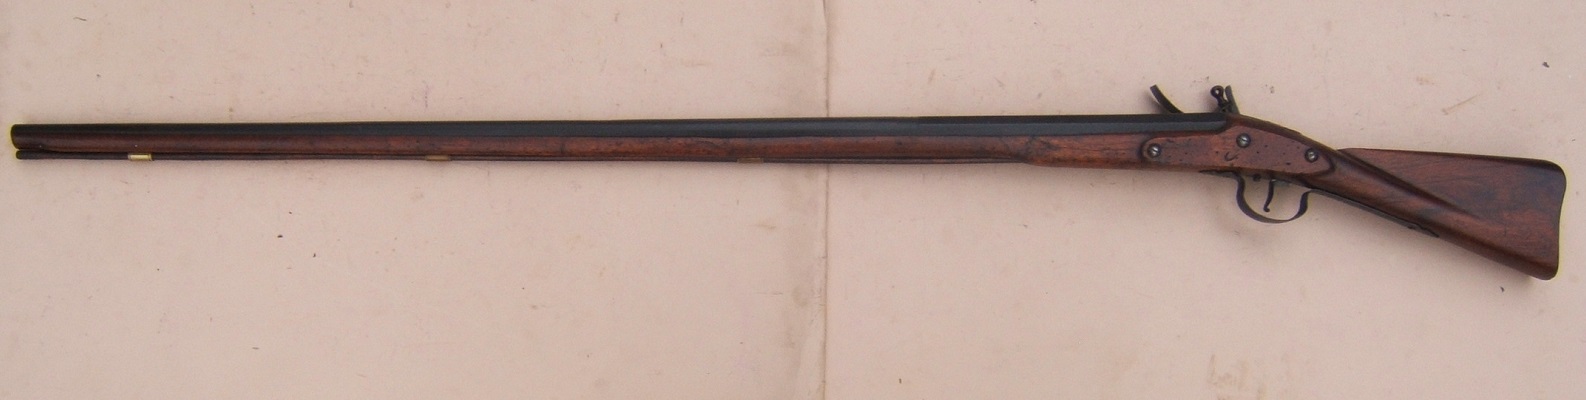 AA VERY RARE & EARLY COLONIAL NEW ENGLAND AMERICAN DOGLOCK MUSKET/LONG-FOWLER, ca. 1680 view 2